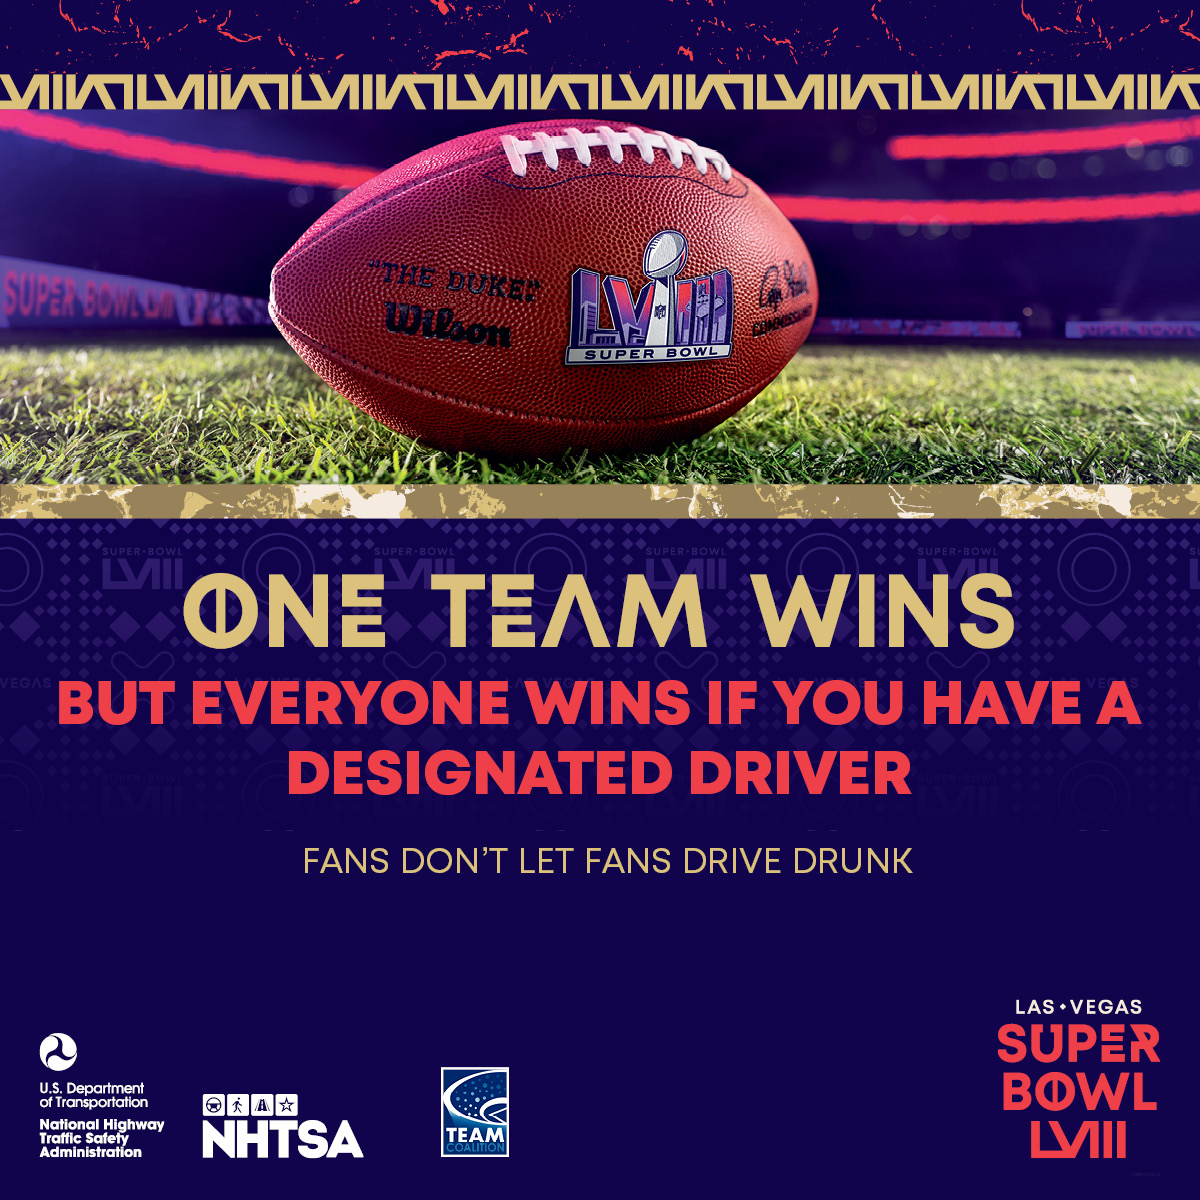 Why Traffic Deaths Spike on Super Bowl Sundays & How to Stay Safe